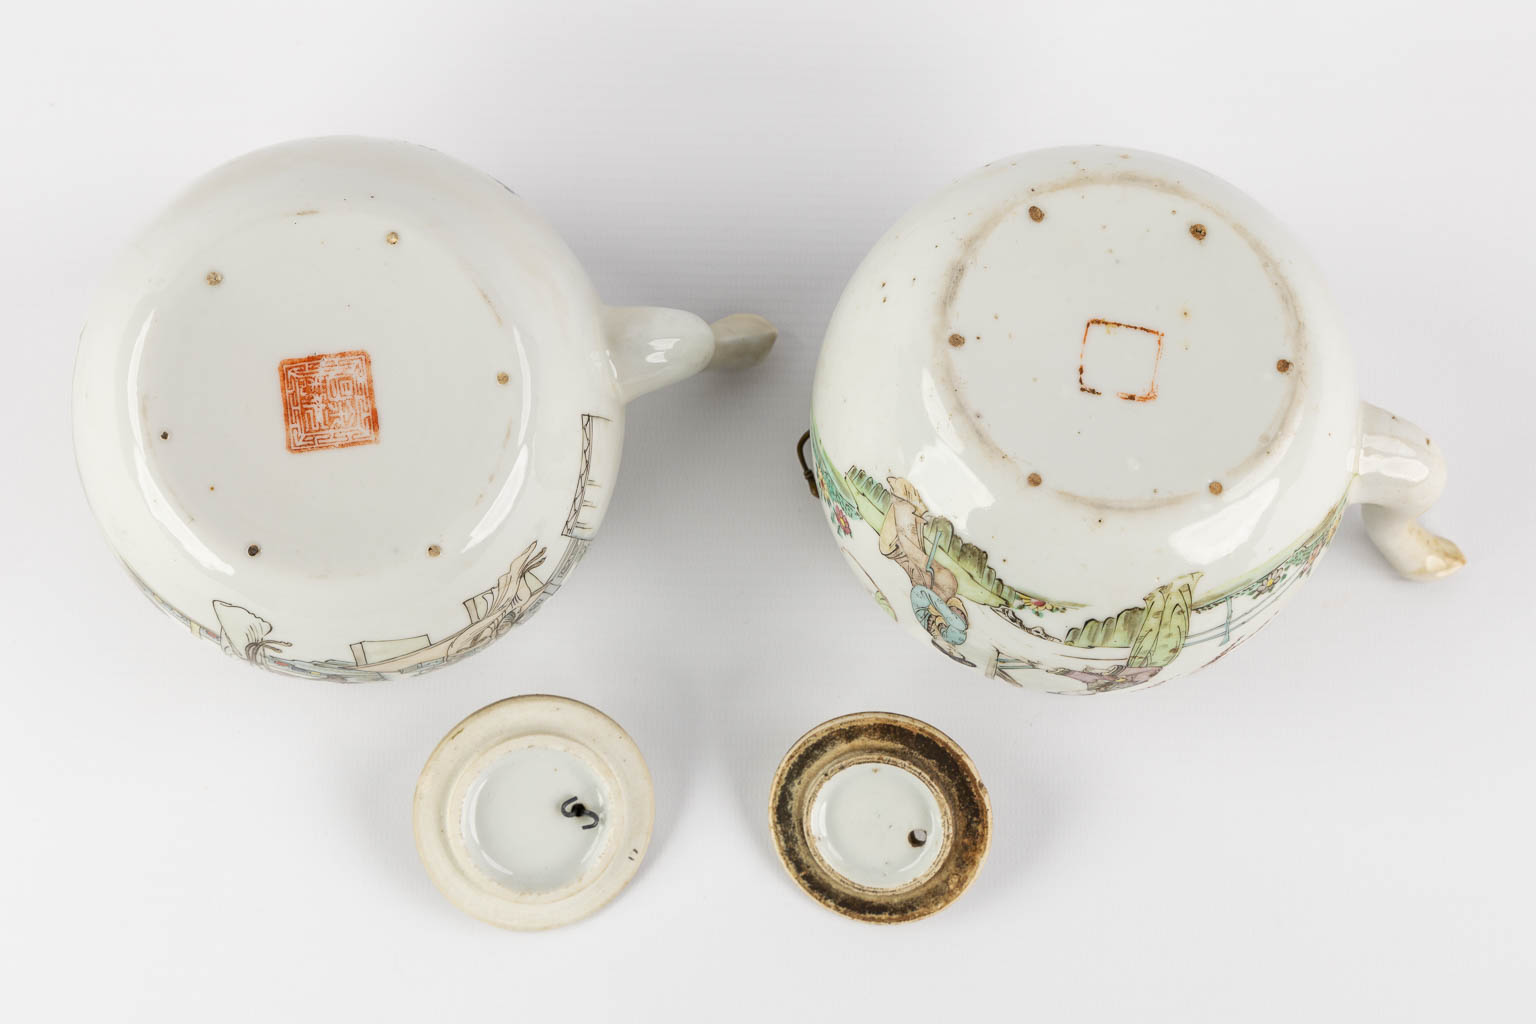 Two Chinese teapots, decorated with figurines. (L:13 x W:17,5 x H:10 cm) - Image 13 of 14